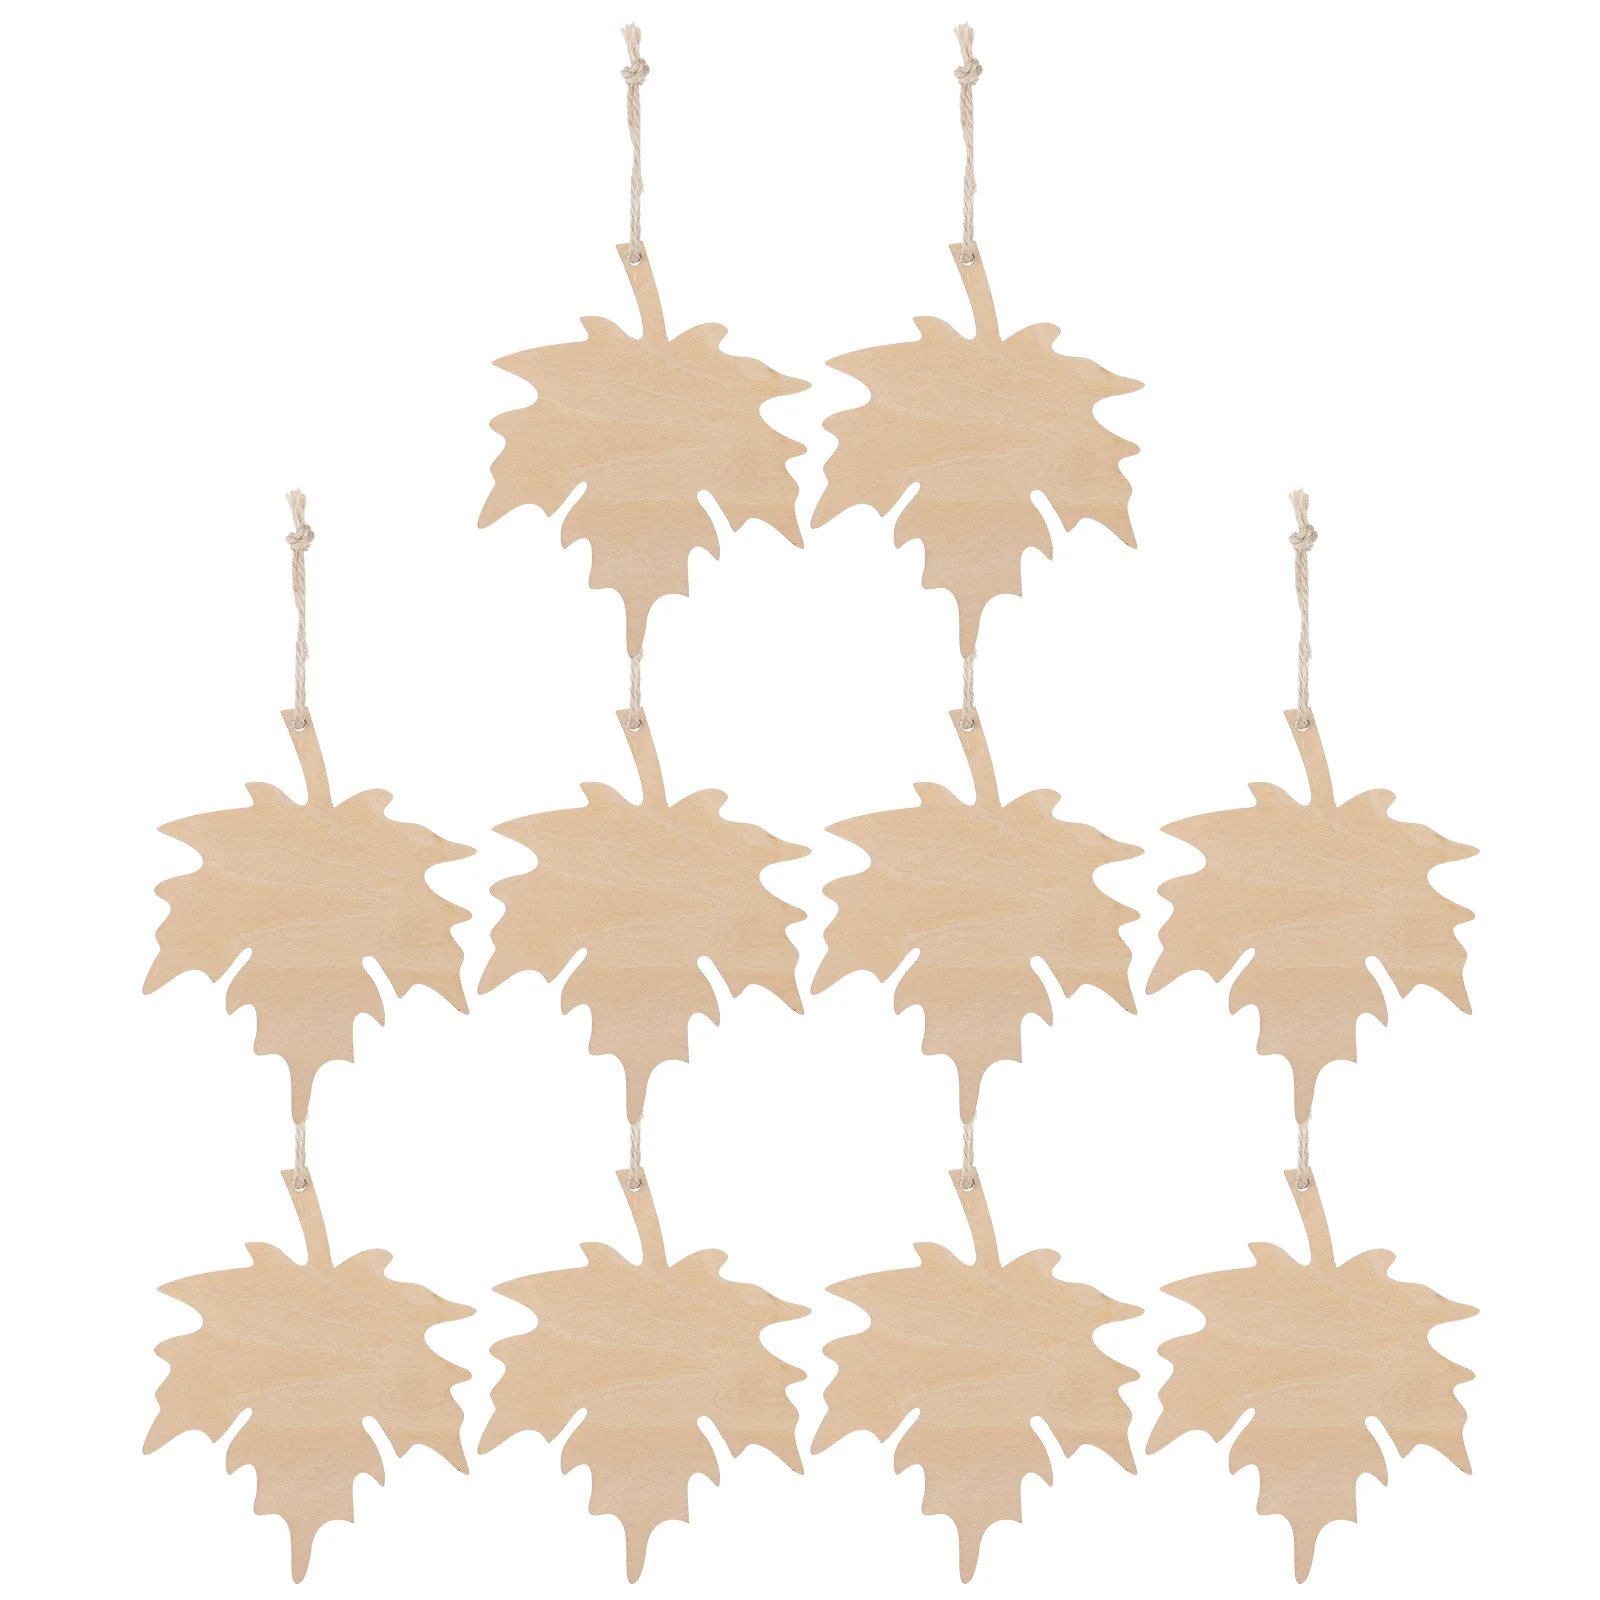 

Wooden Leaf Leaves Wood Ornaments Tags Maple Cutouts Crafts Hanging Fall Christmas Craft Diy Unfinished Gift Embellishment